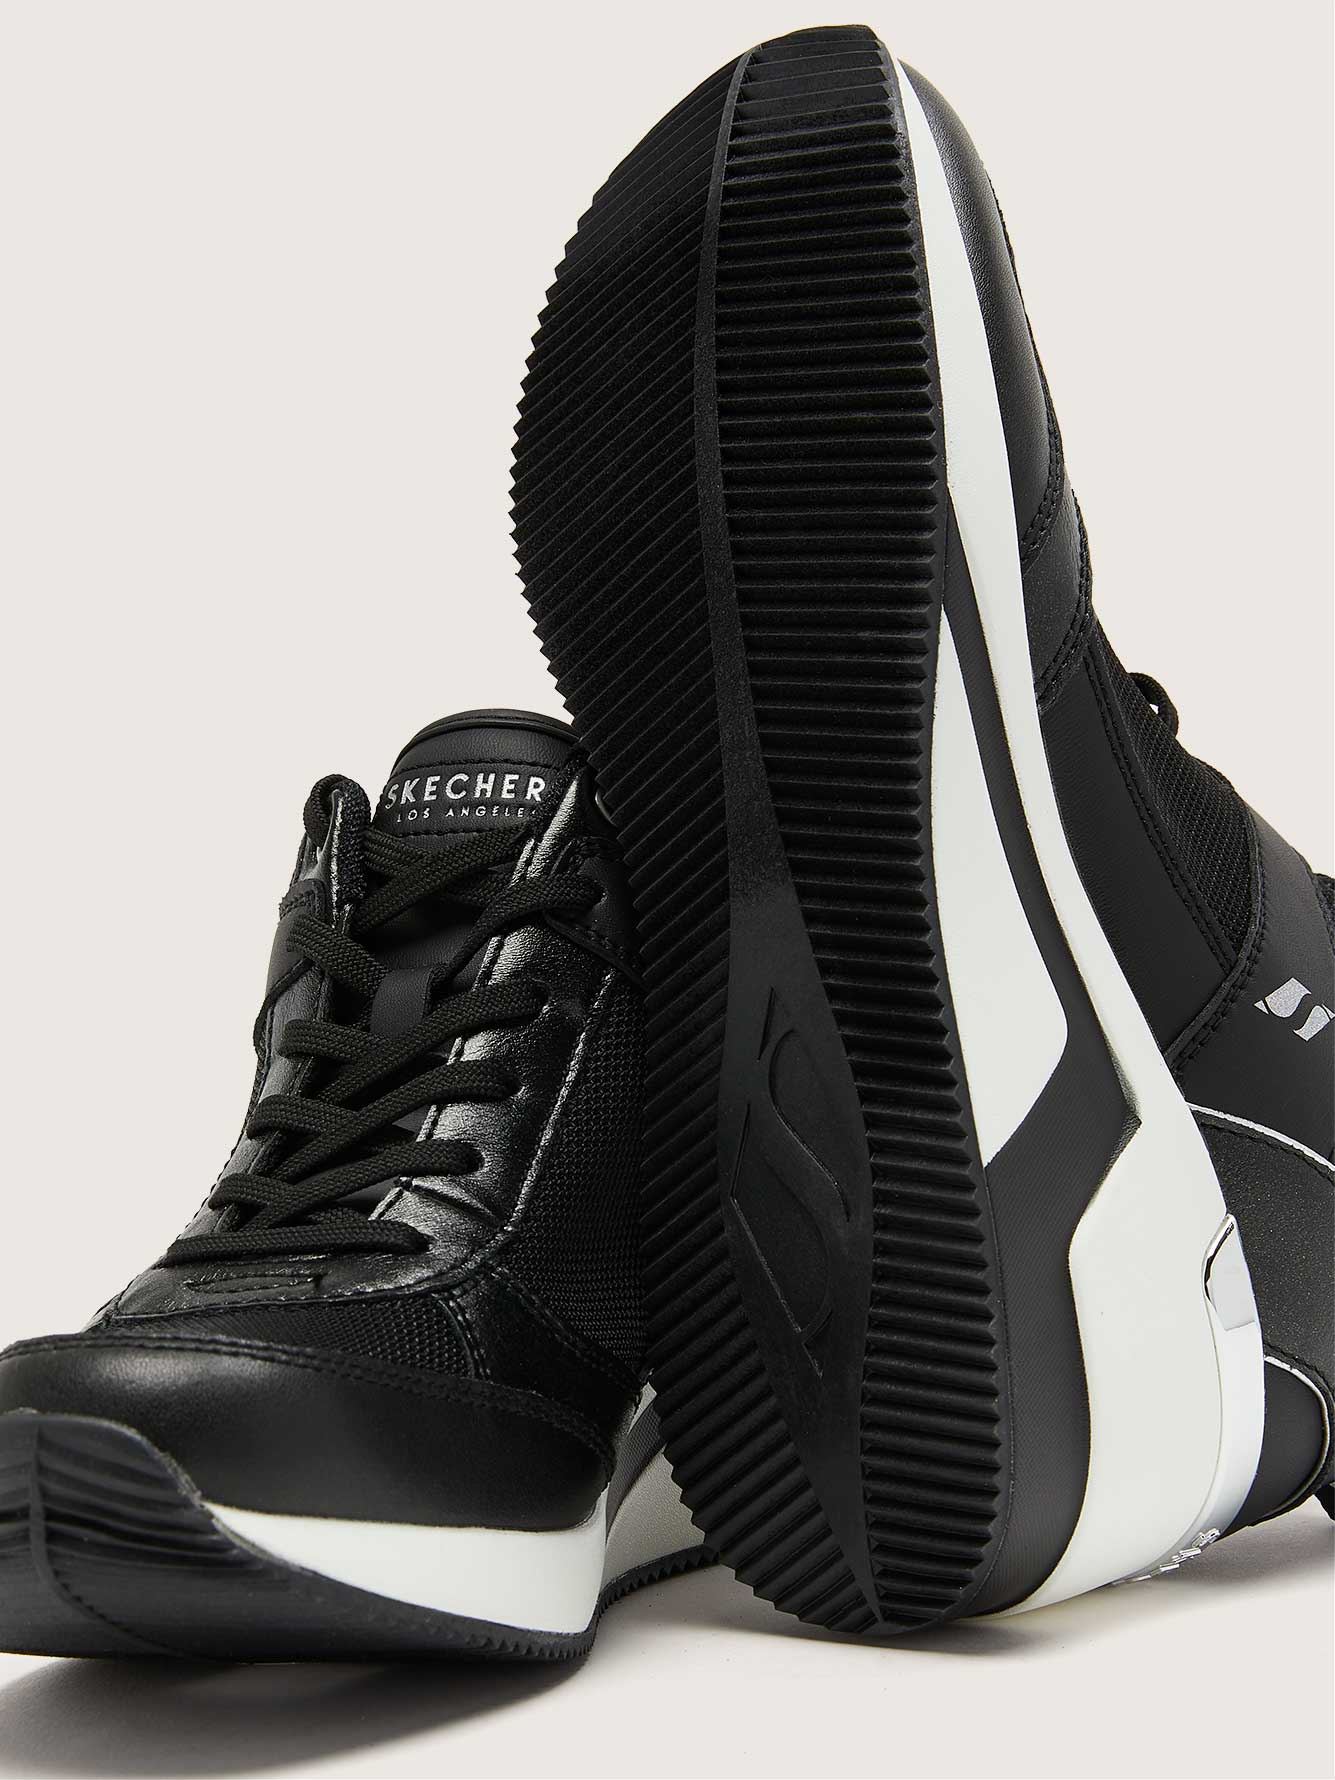 Wide Width Million Air Up There Wedge Sneakers - Skechers